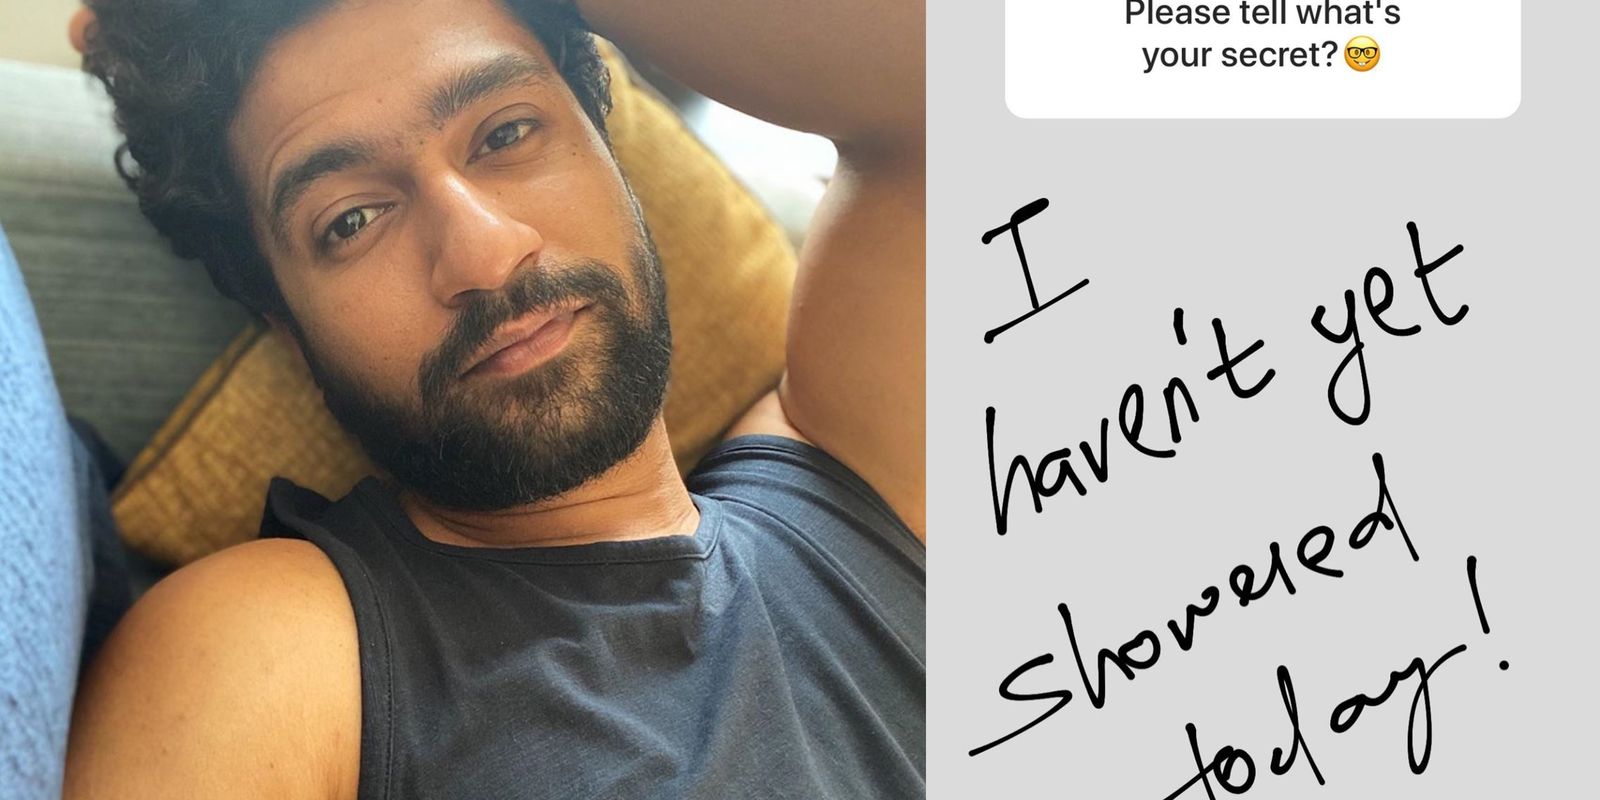 Fan Asks Vicky Kaushal His Secret Actor Replies 'I Haven't Showered Yet Today'; Also Answers A Fan Asking For His Address